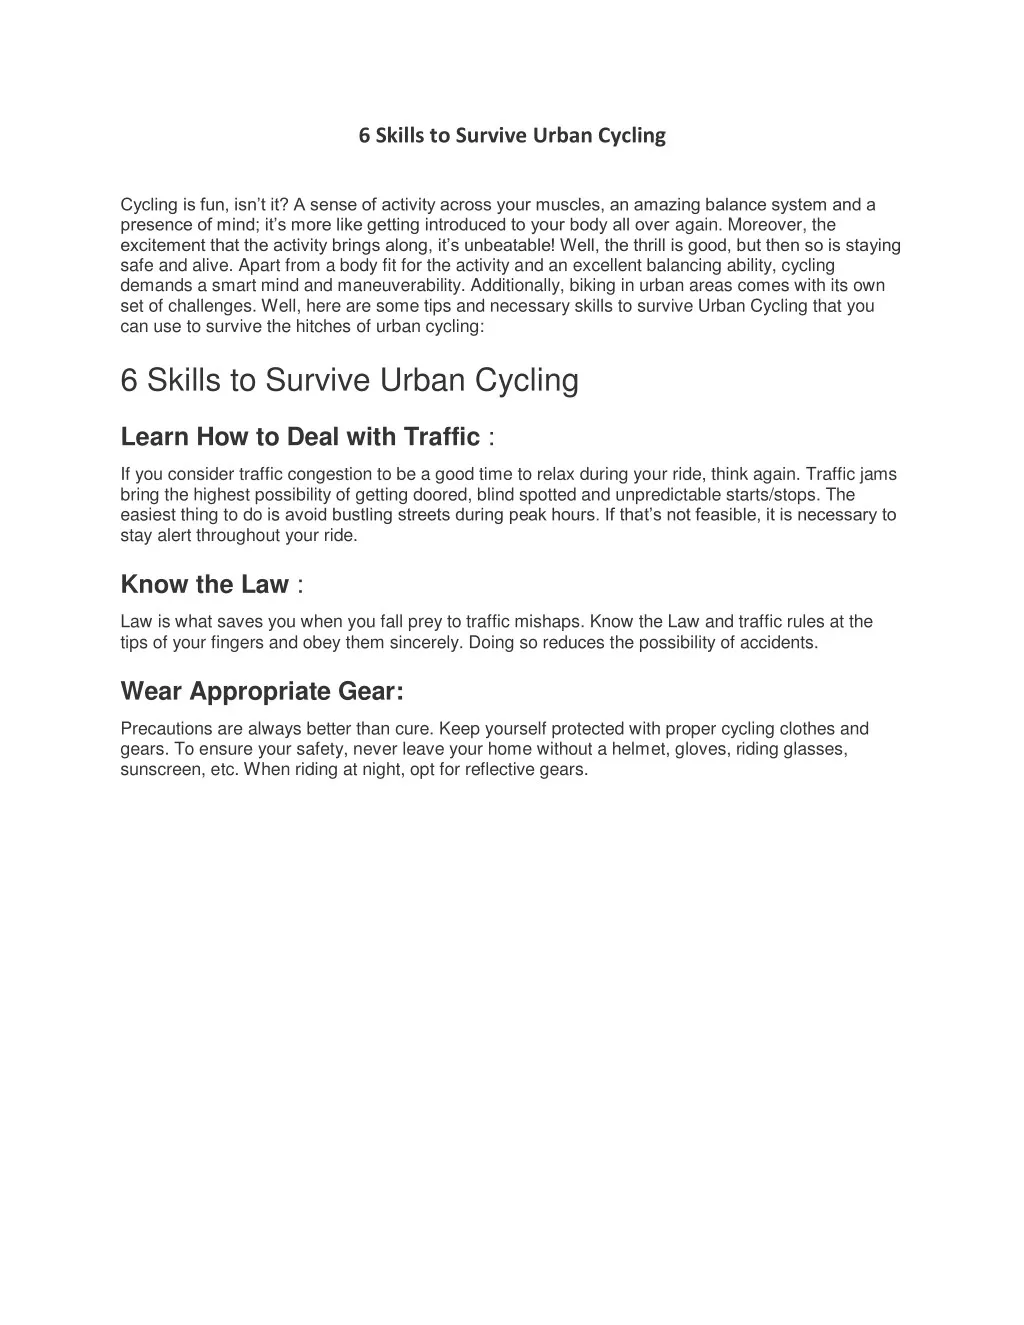 6 skills to survive urban cycling